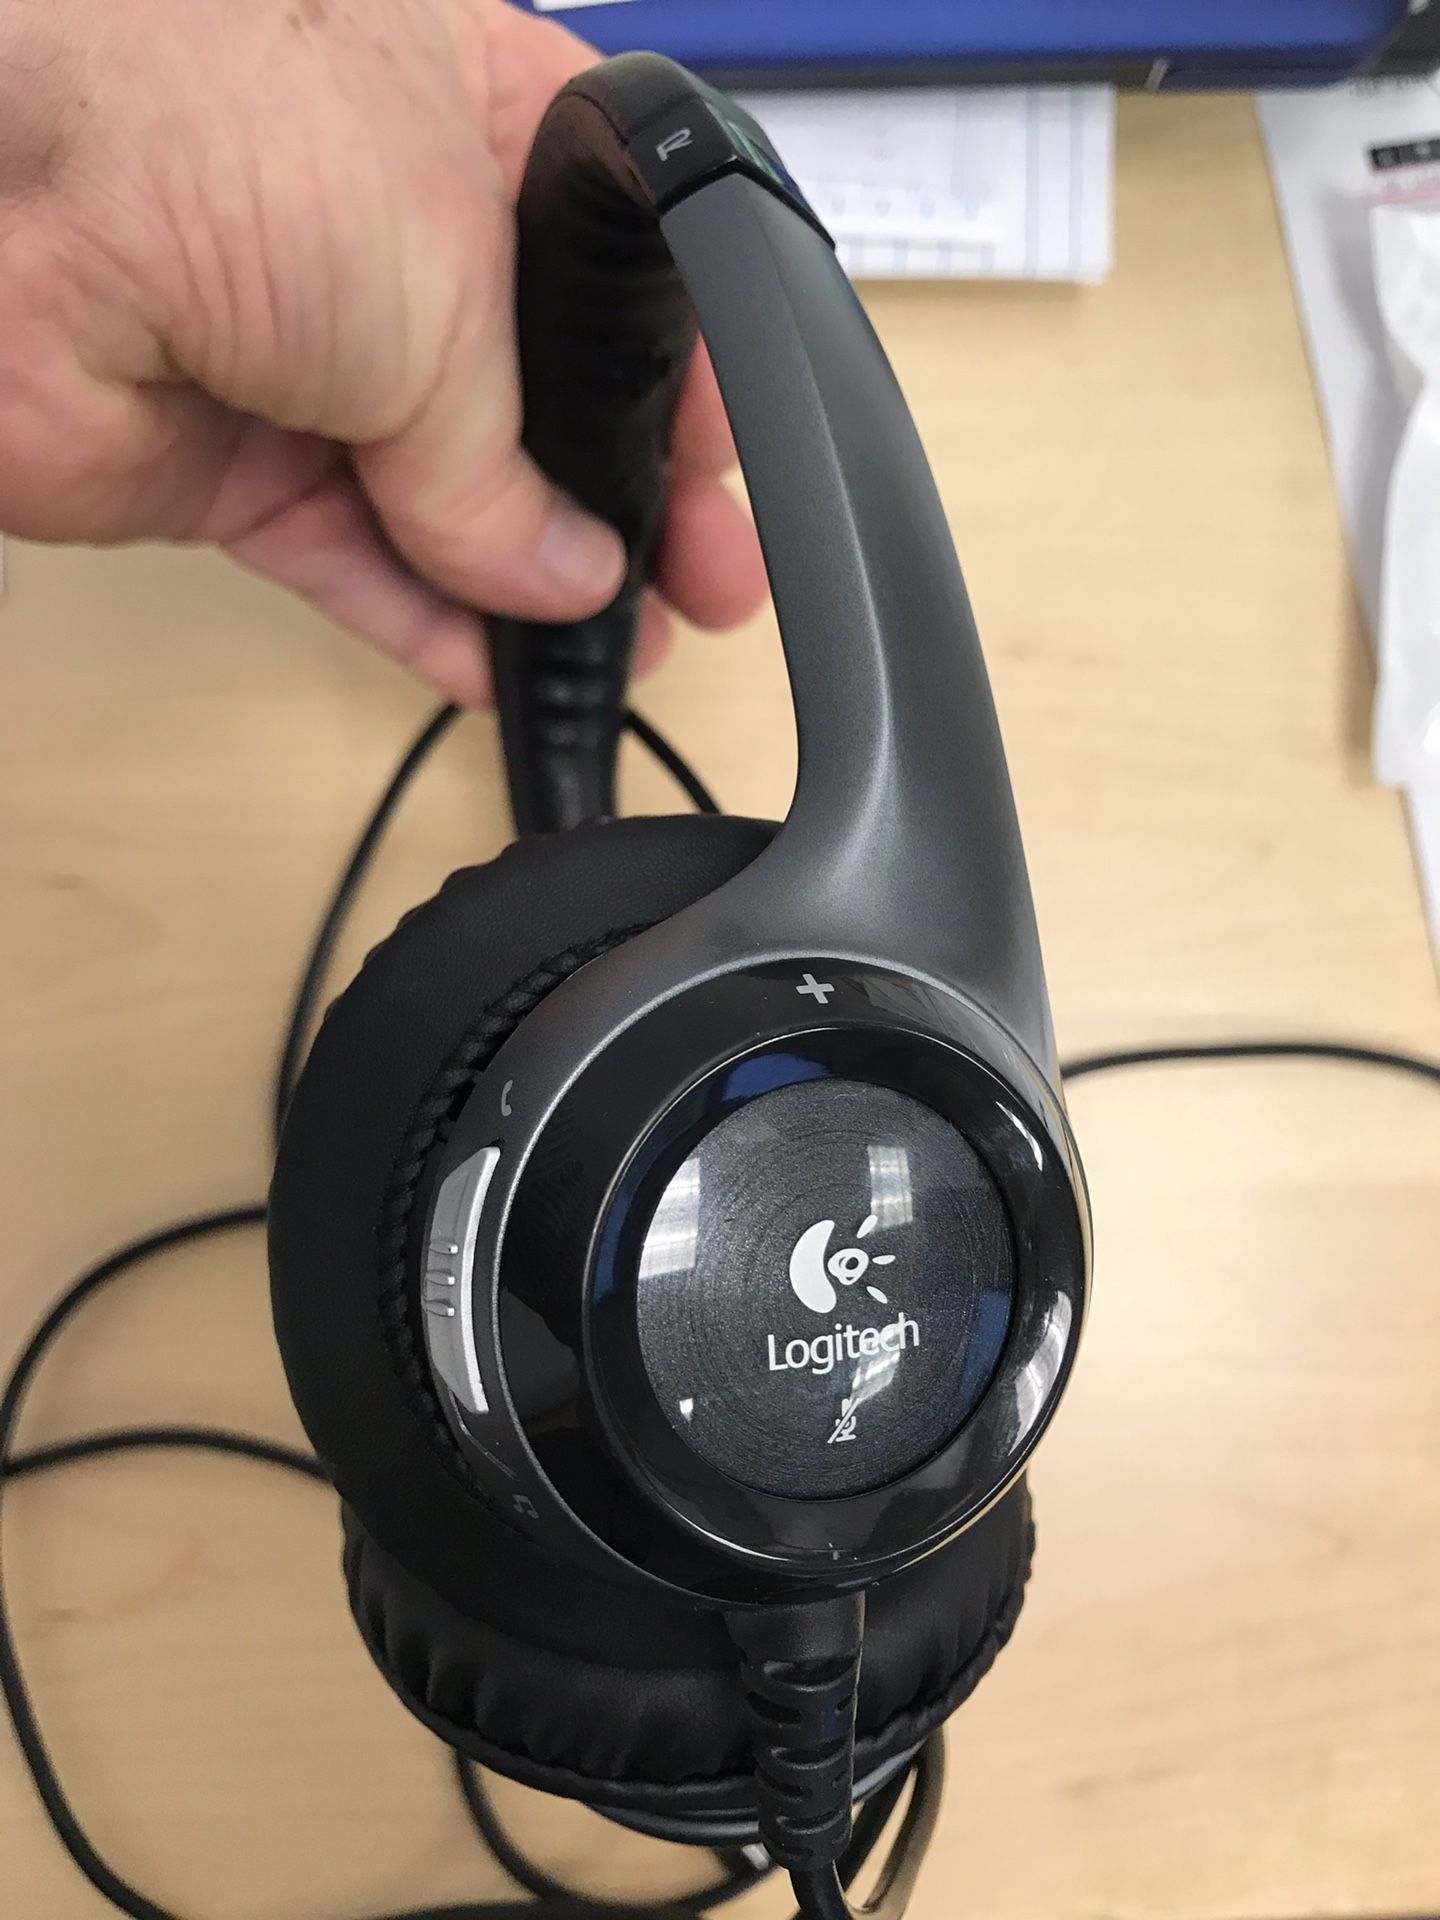 Logitec H530 USB headset with microphone